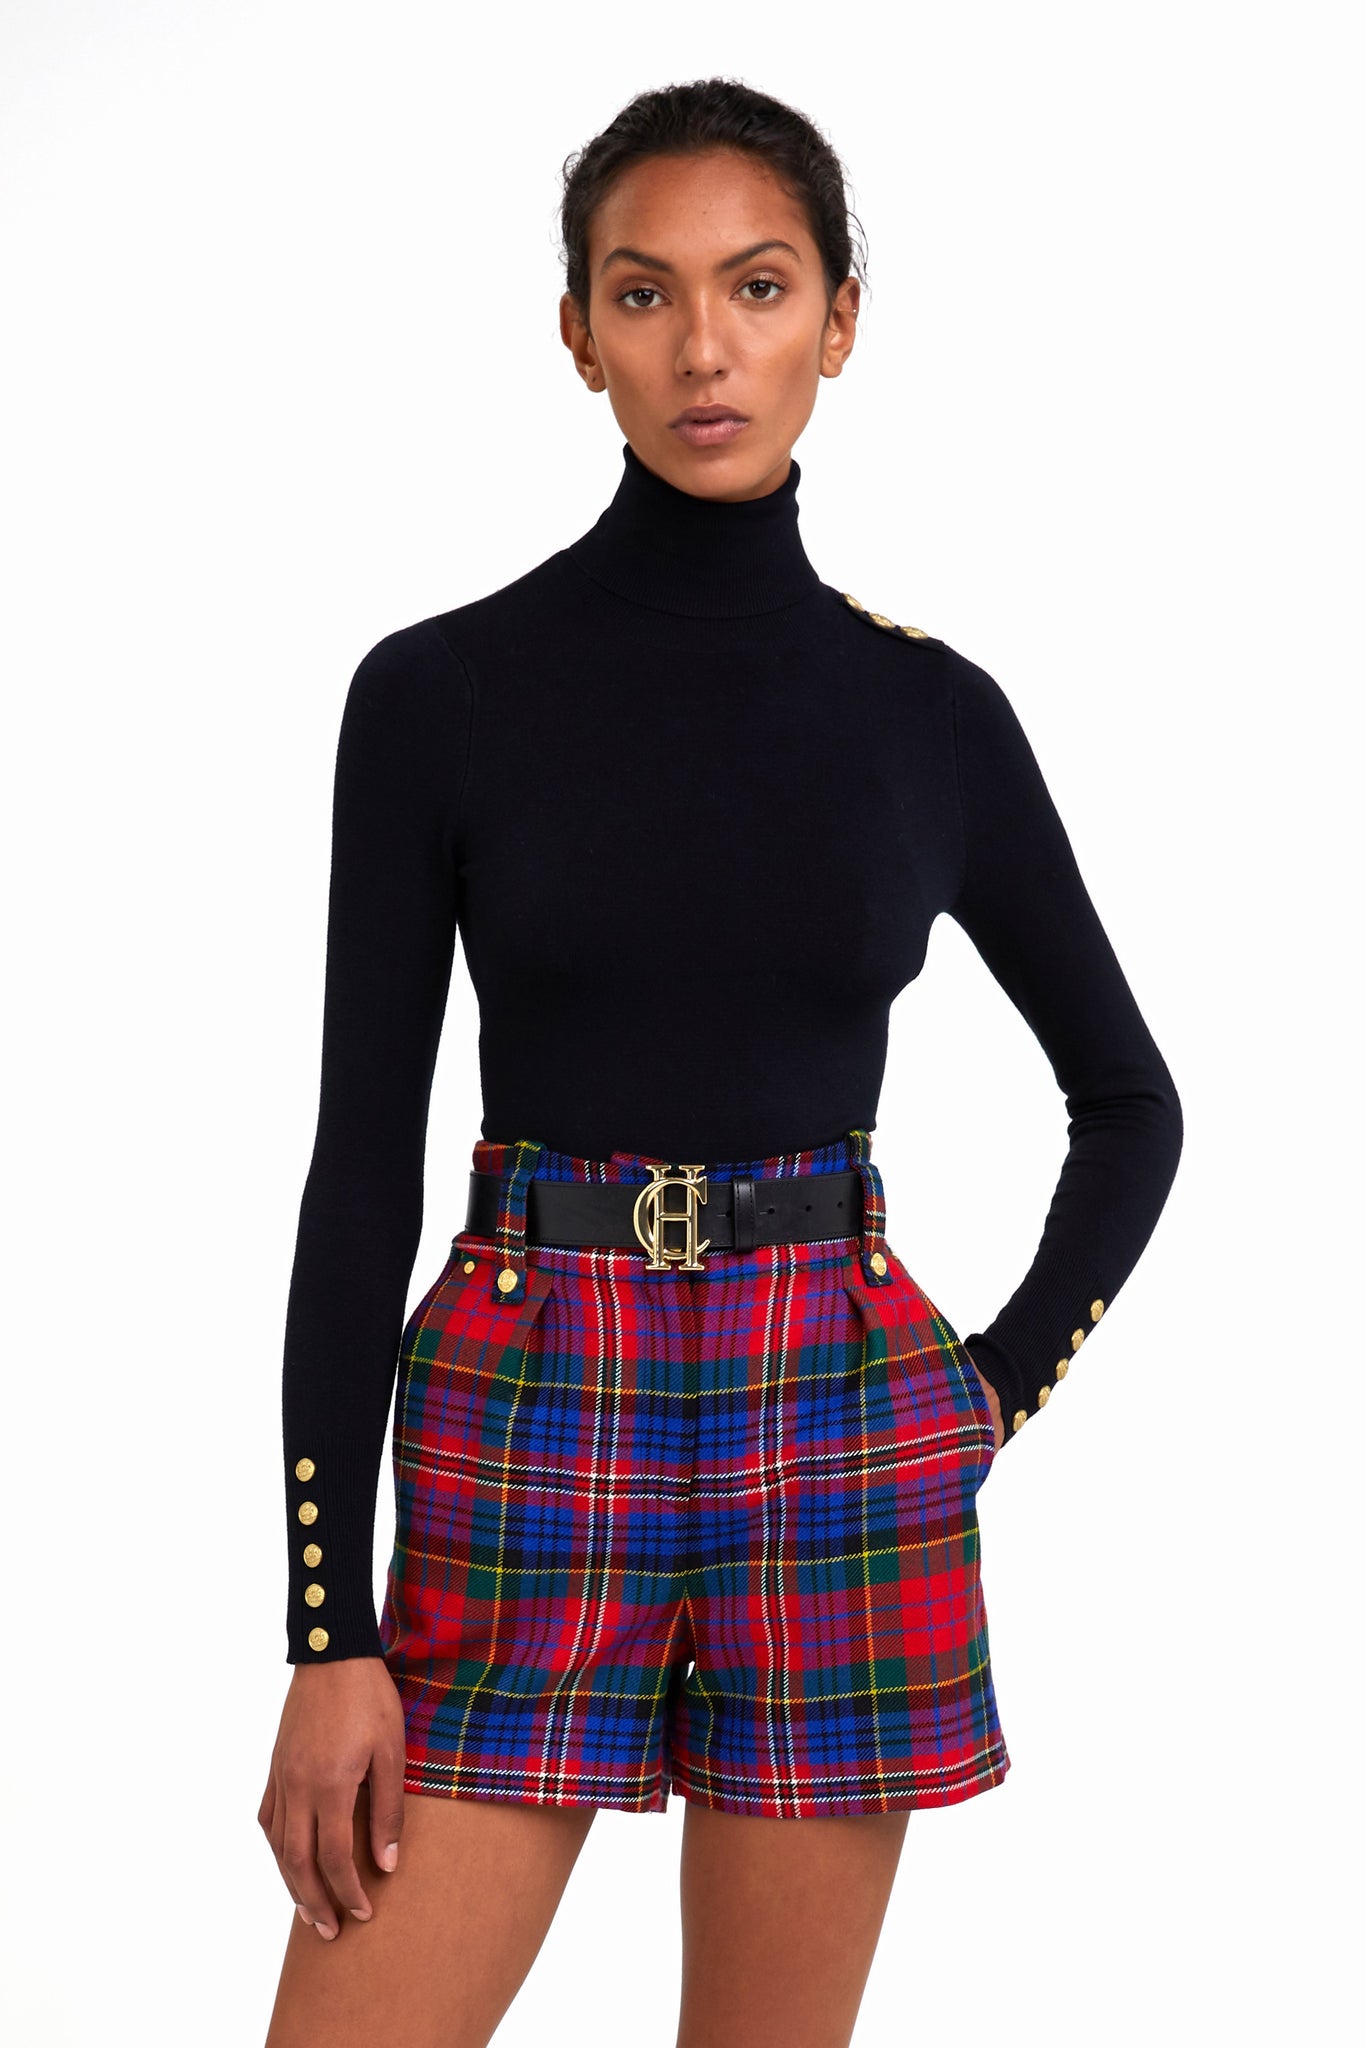 womens red blue and green tartan high rise tailored shorts with two single knife pleats and centre front zip fly fastening with twin branded gold stud buttons and side hip pockets with branded rivet detailing at top and bottom of pockets worn with black roll neck